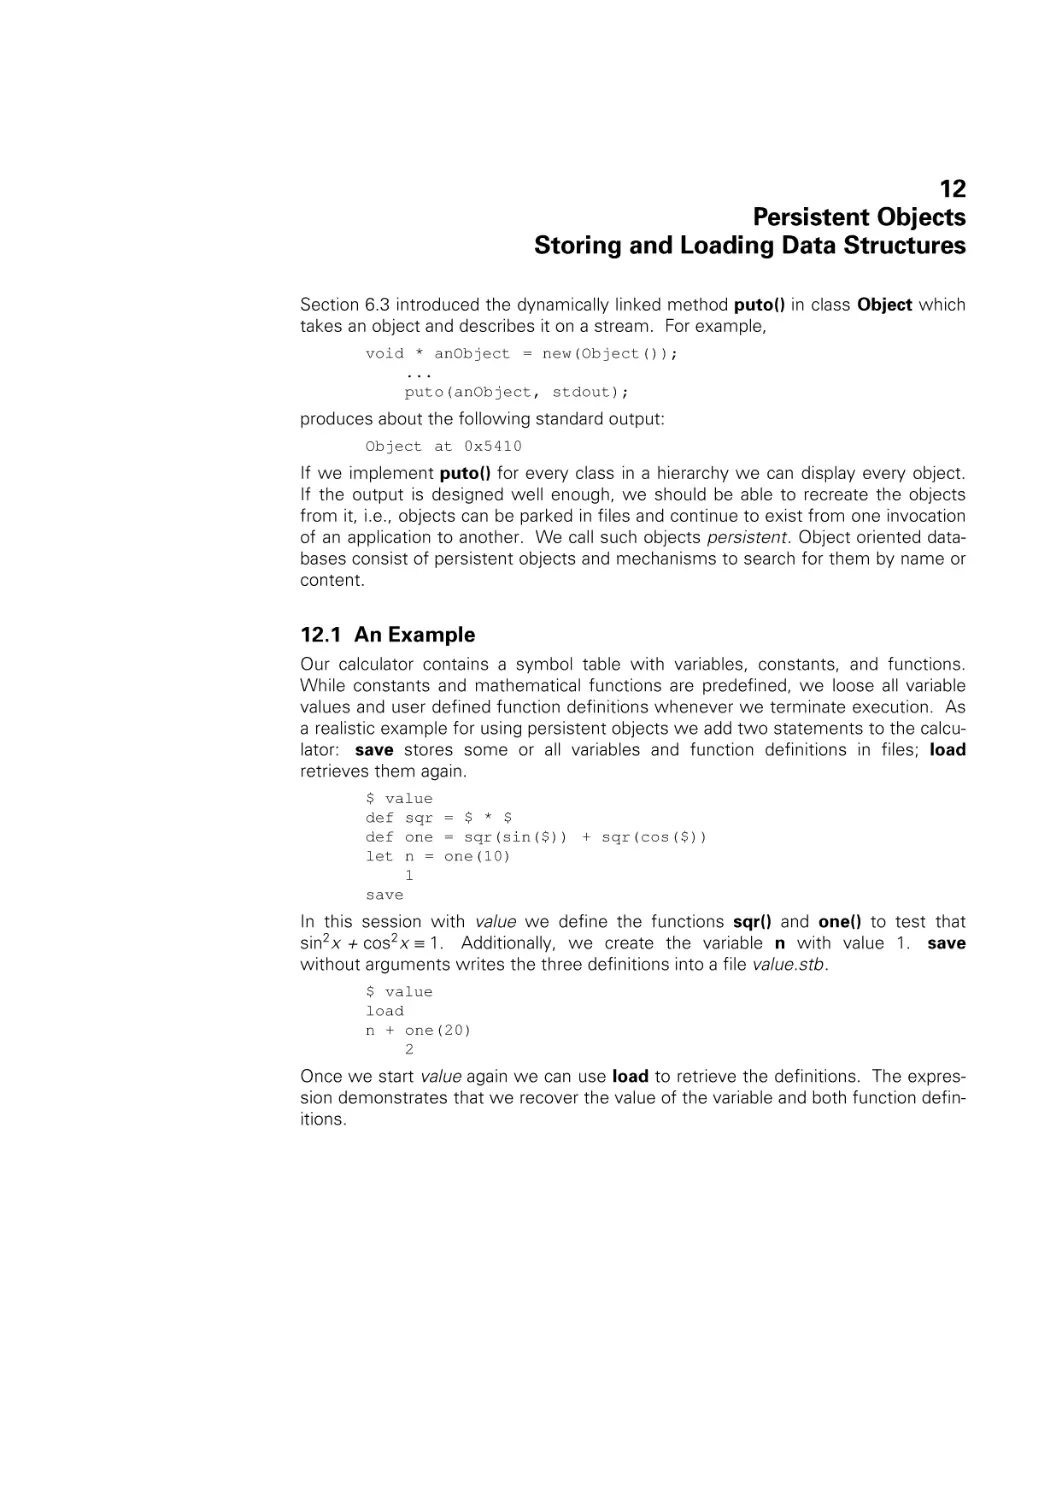 Persistent Objects Storing & Loading Data Structures
Example